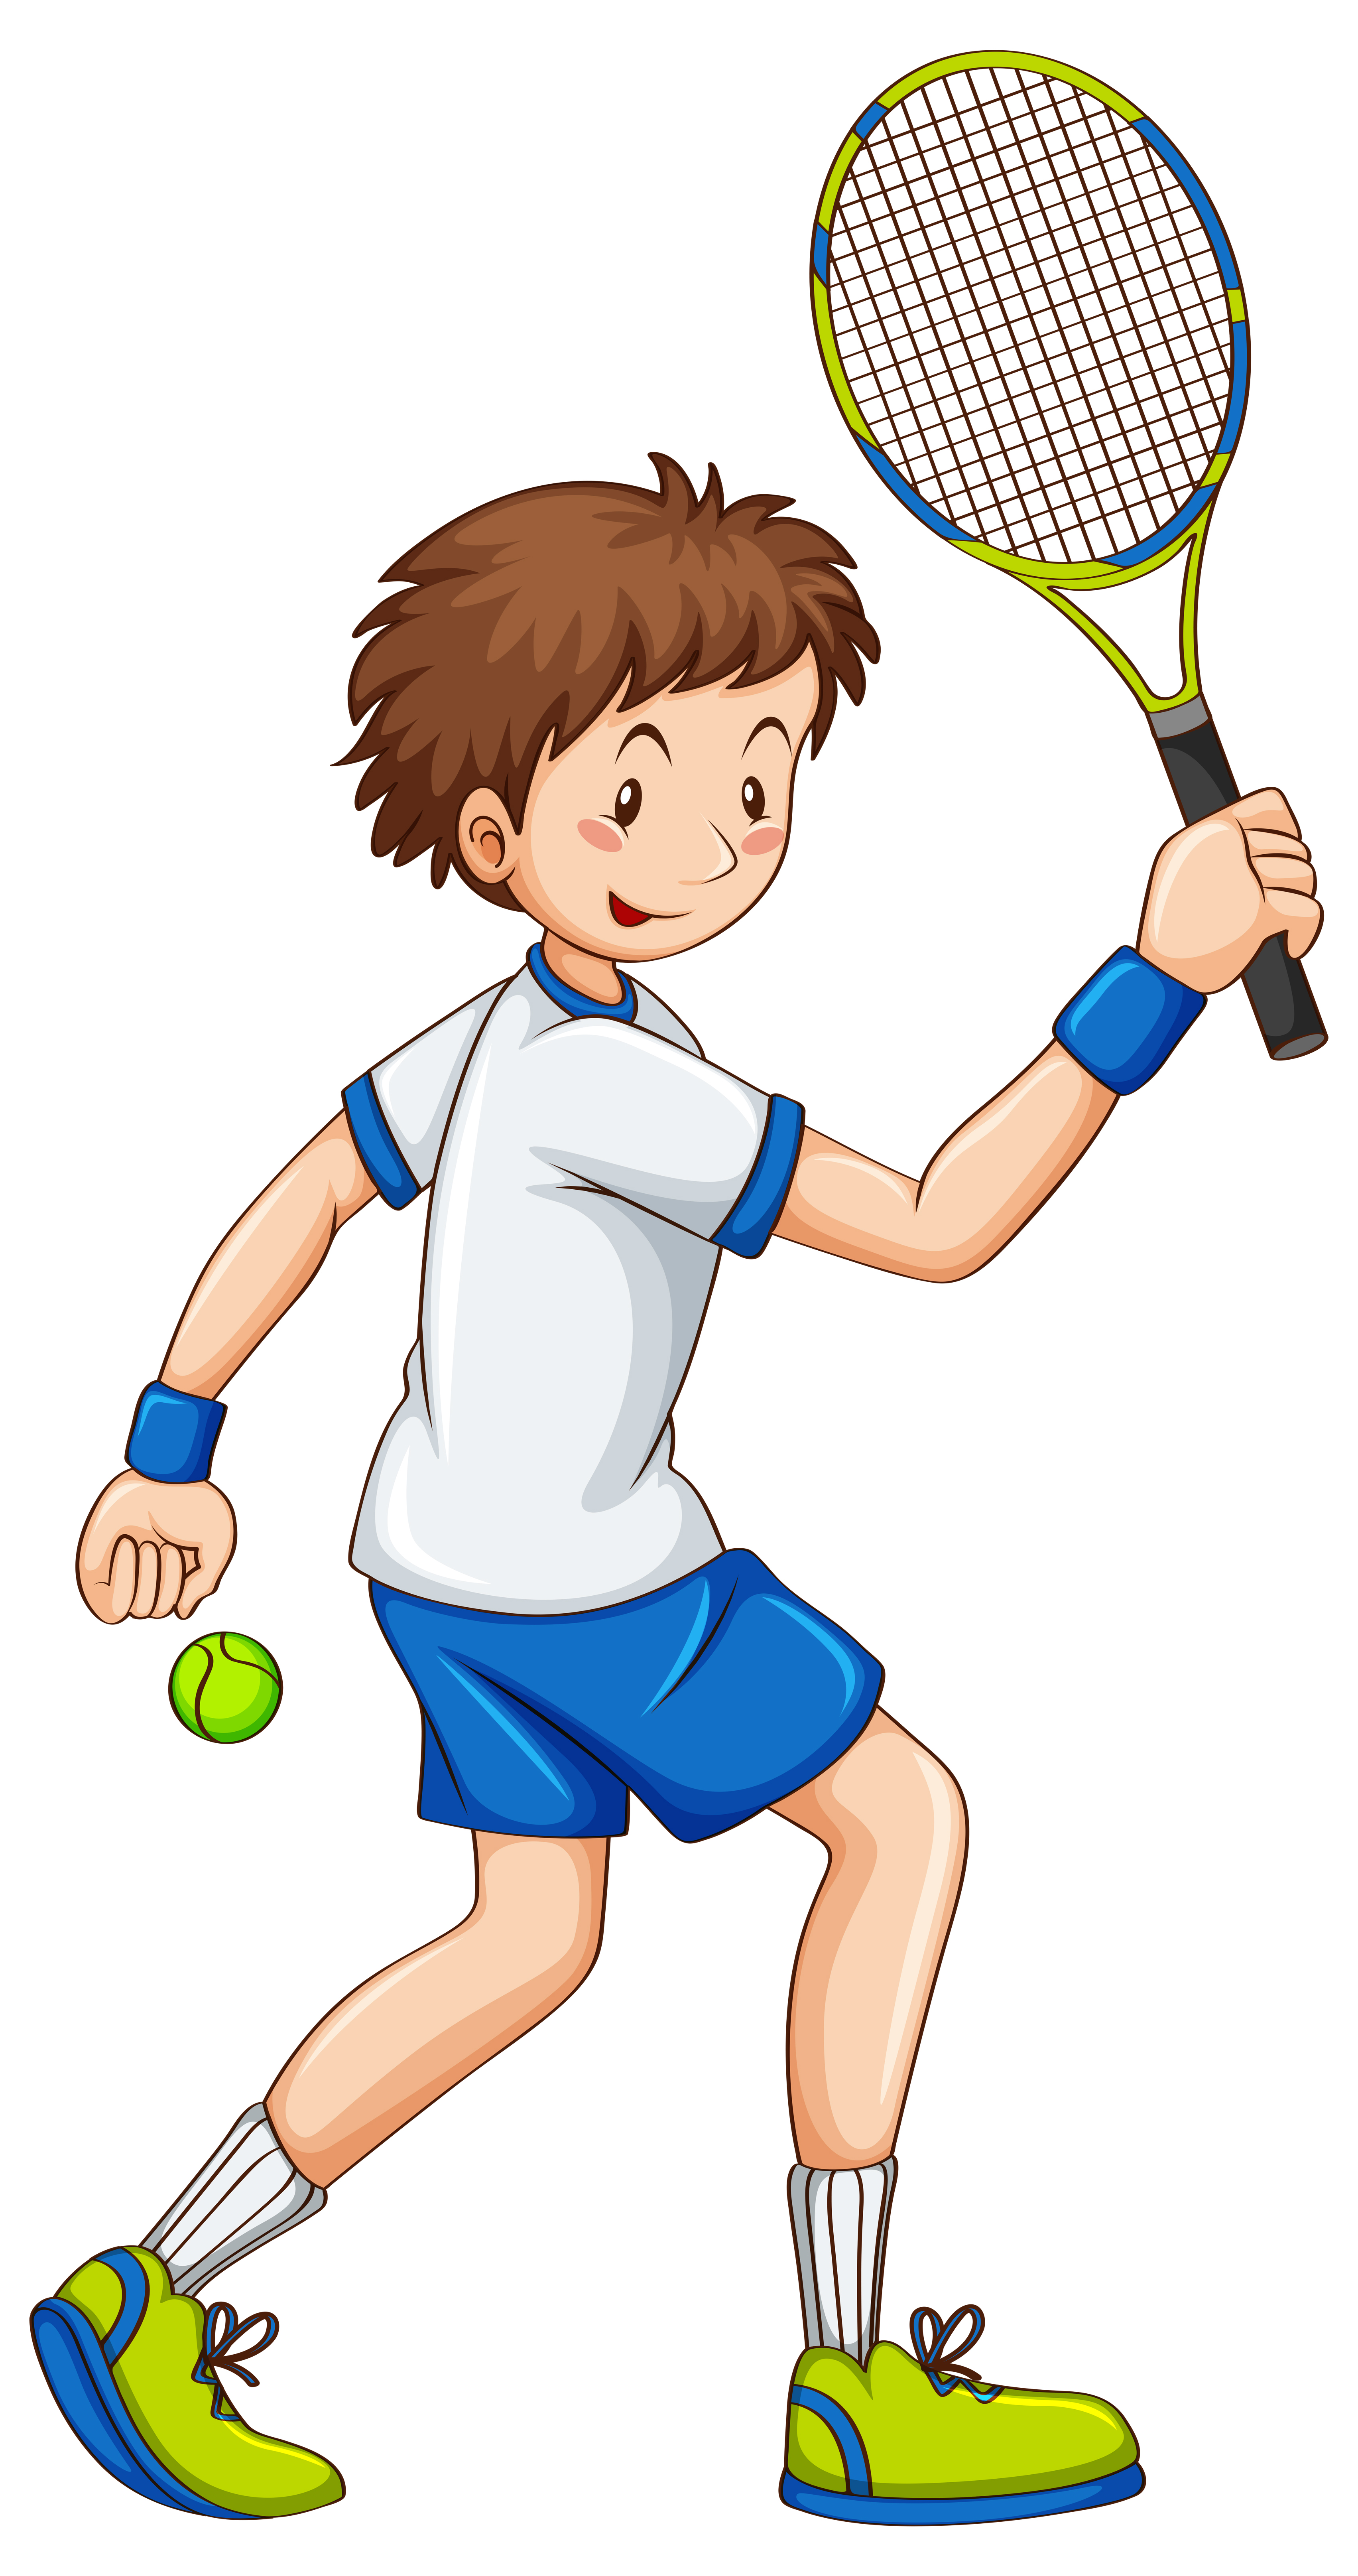 Tennis player hitting ball with racket Download Free Vectors Clipart Graphics & Vector Art